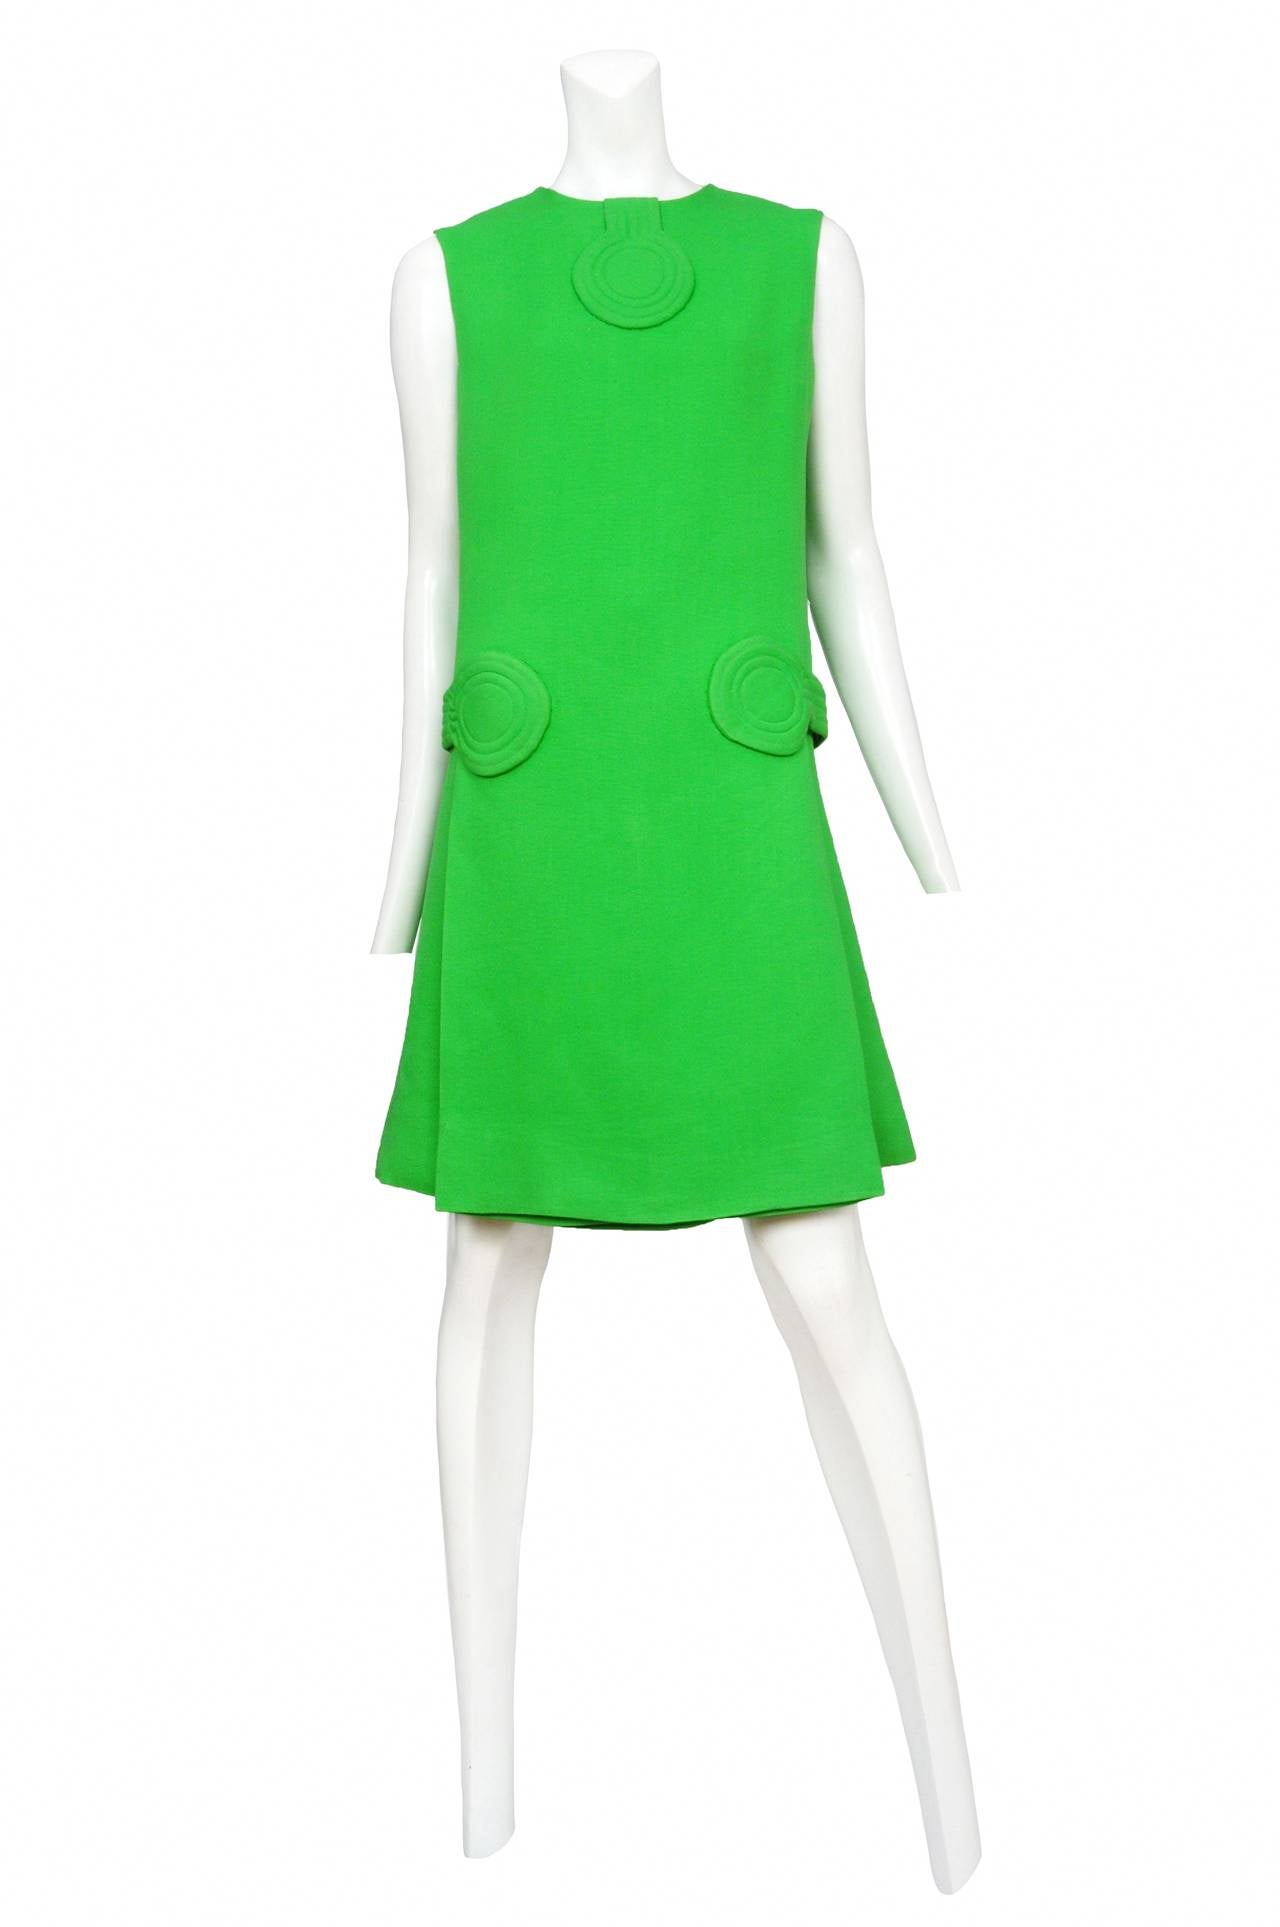 Vibrant kelly green linen day dress. Classic Cardin circles with top stitch detailing.